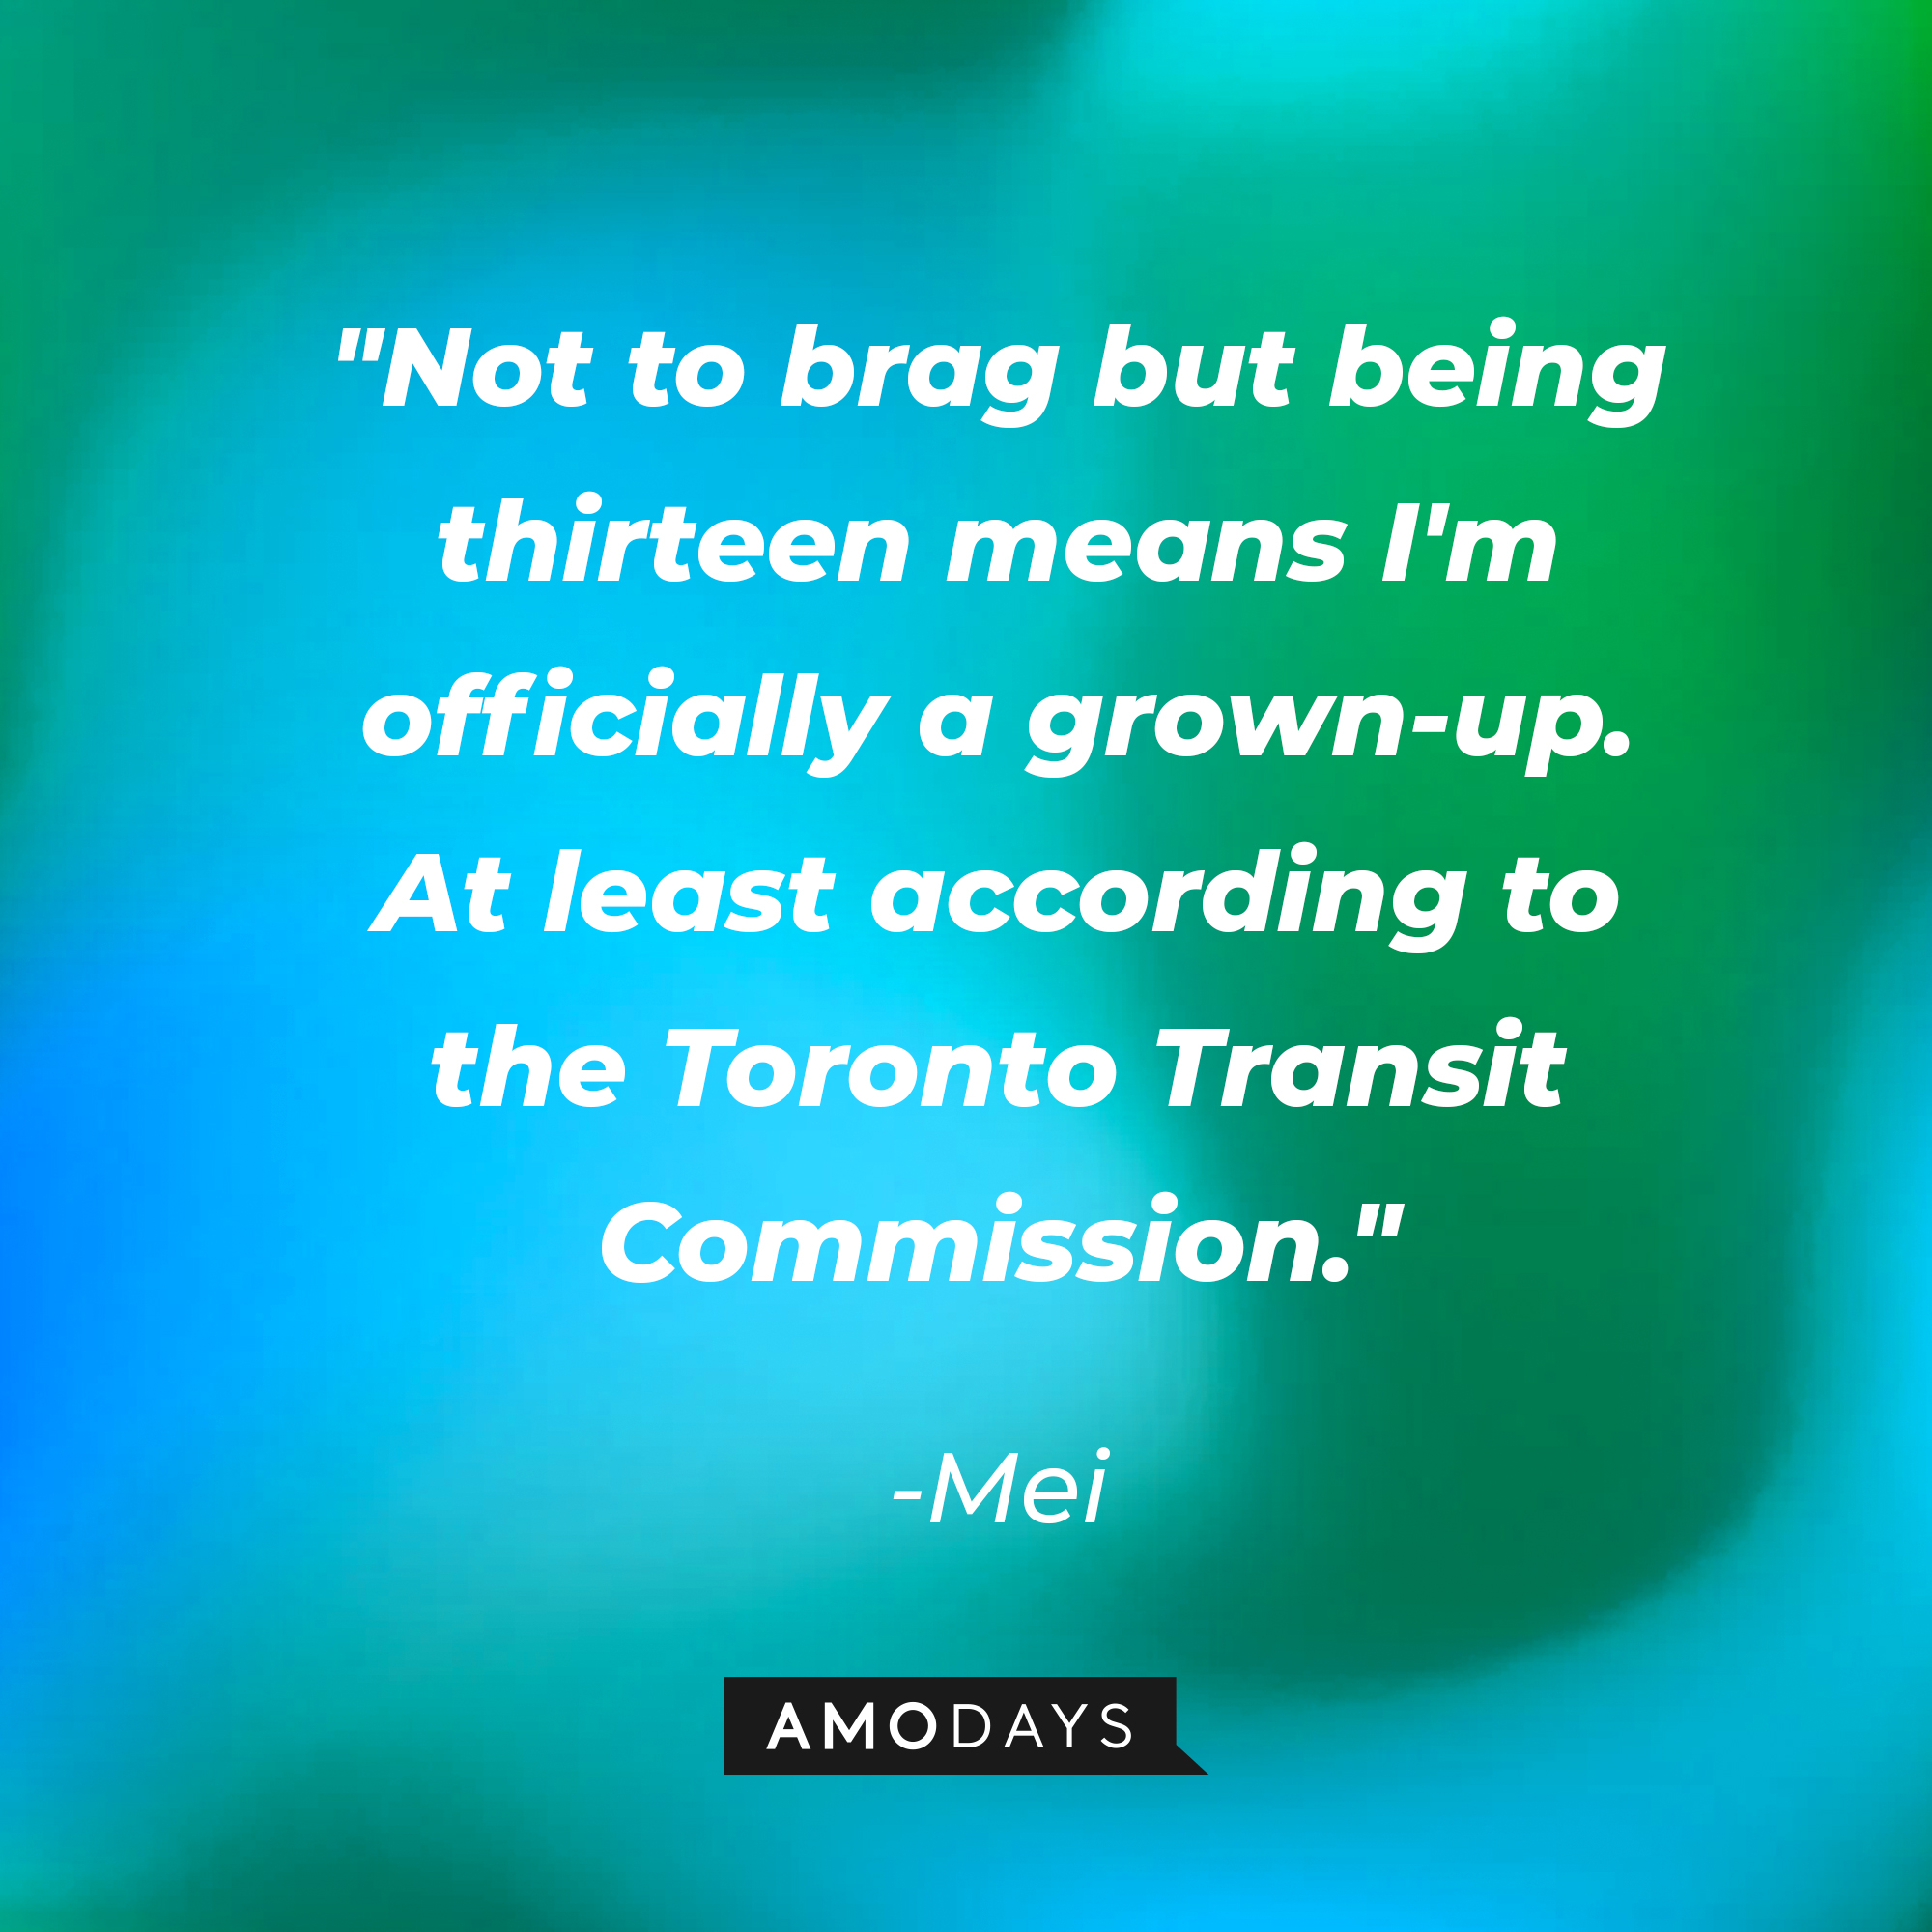 Mei's quote: "Not to brag but being thirteen means I'm officially a grown-up. At least according to the Toronto Transit Commission." | Source: AmoDays